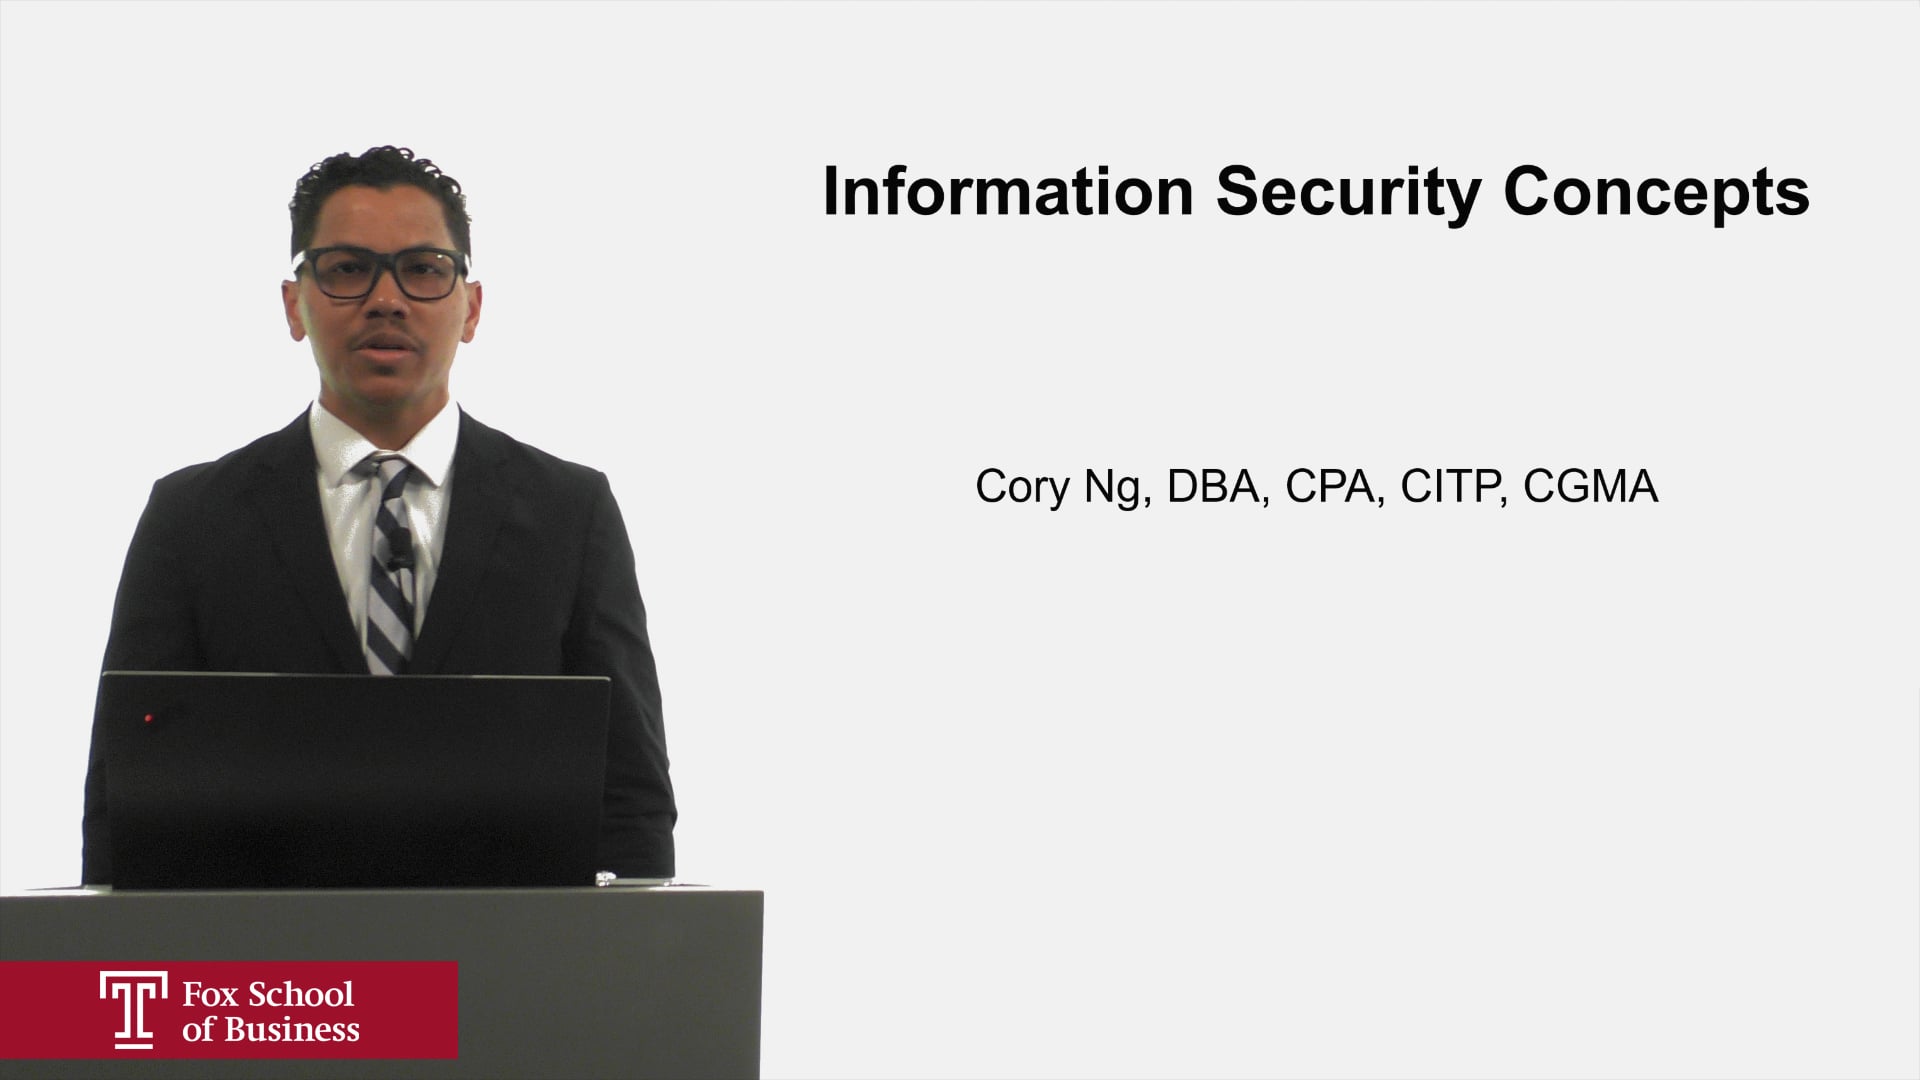 Information Security Concepts